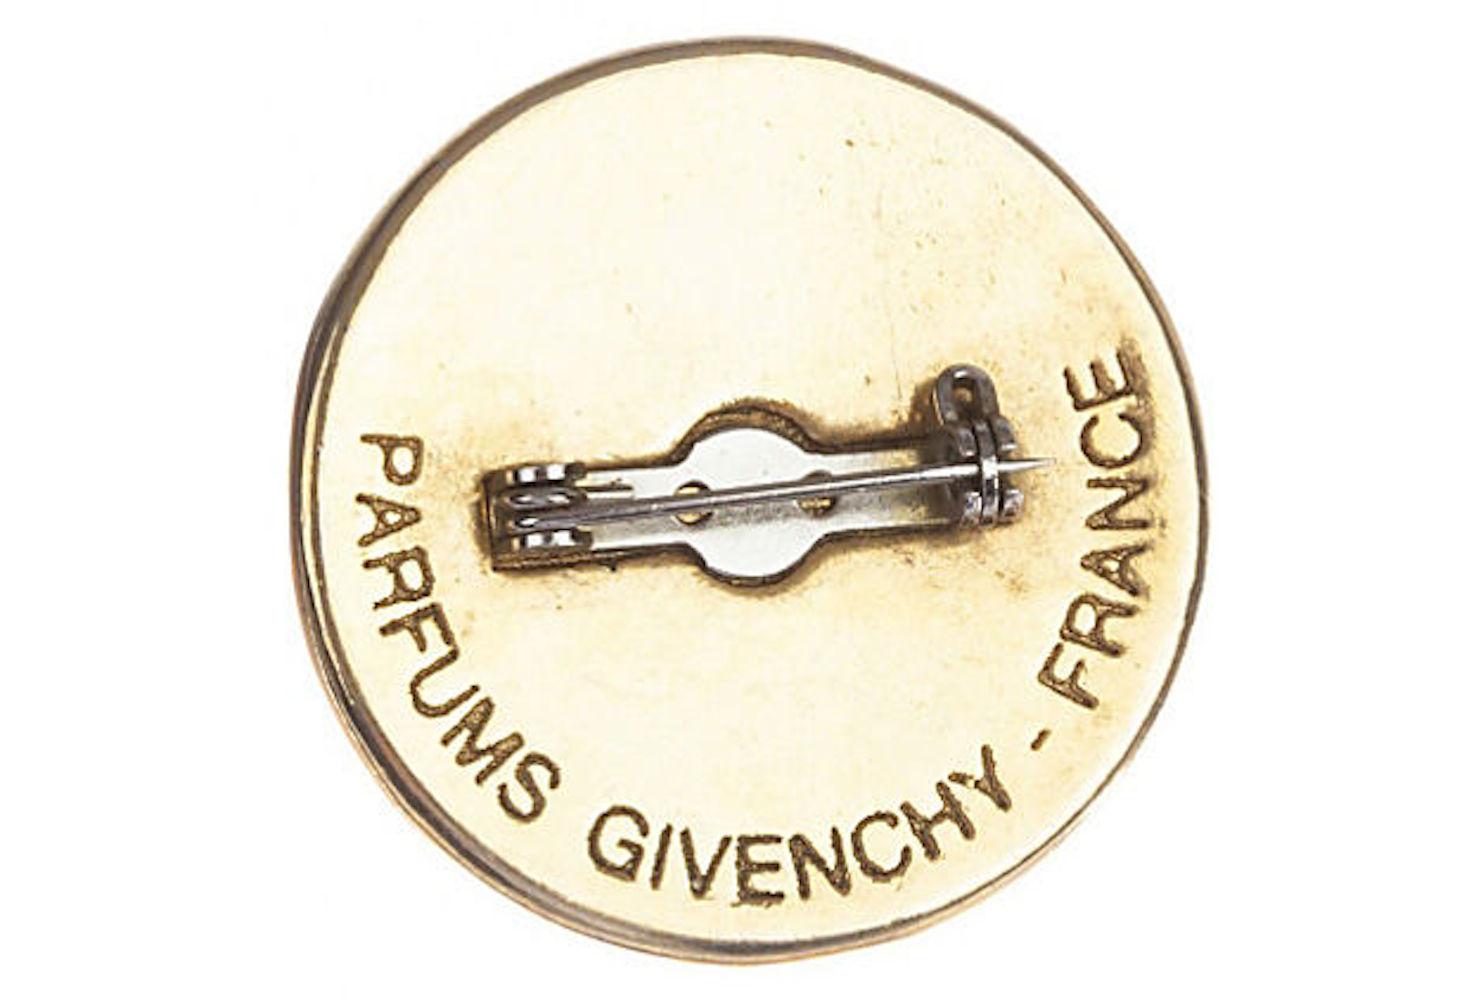 Givenchy Monogram Circular Pin Brooch In Excellent Condition For Sale In New York, NY